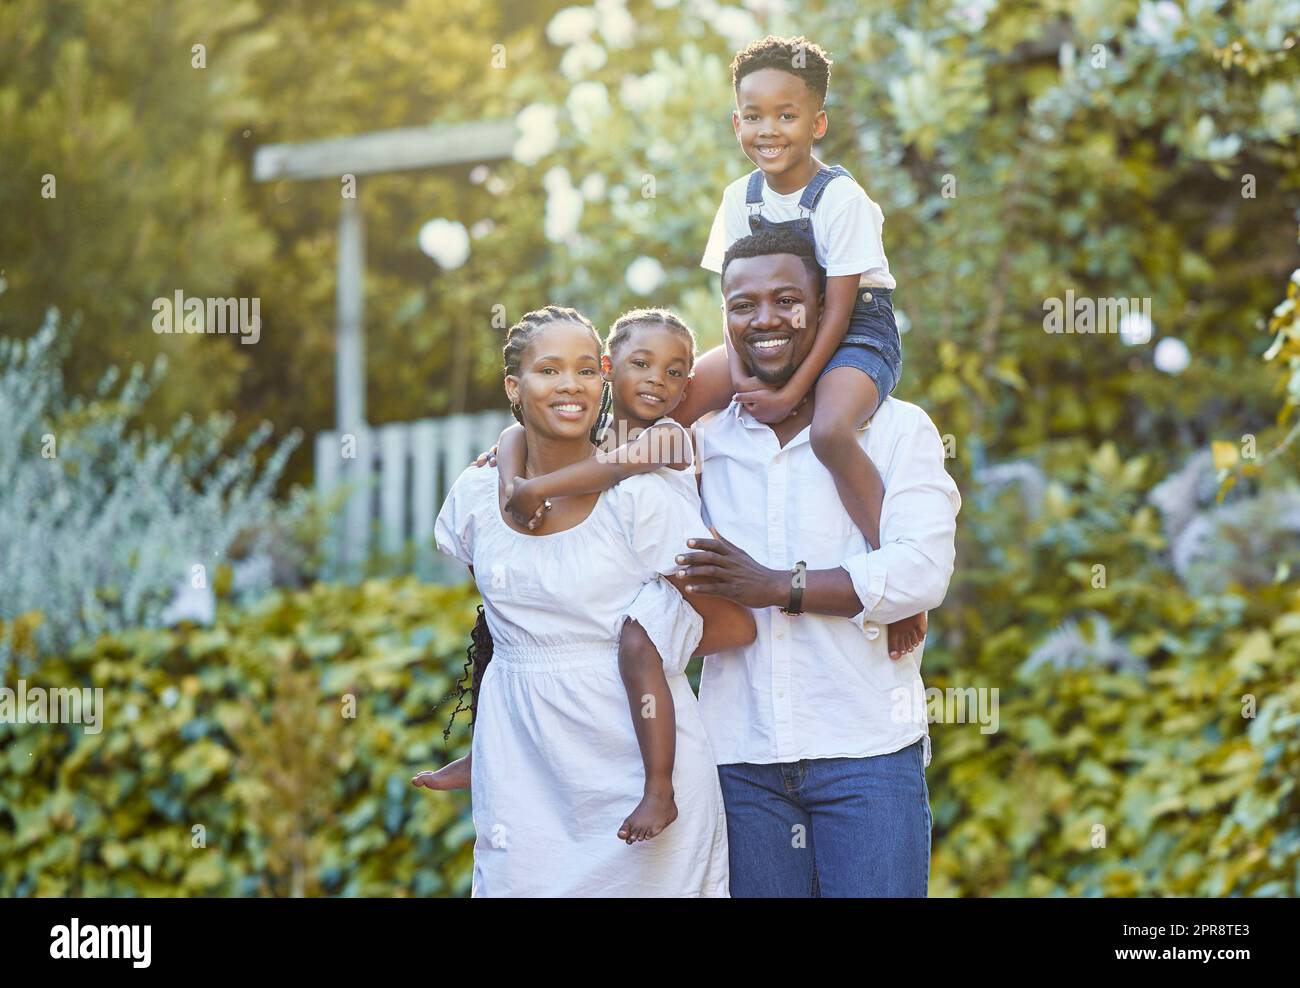 Our love gave us two beautiful kids. a couple spending time outdoors with their two children. Stock Photo